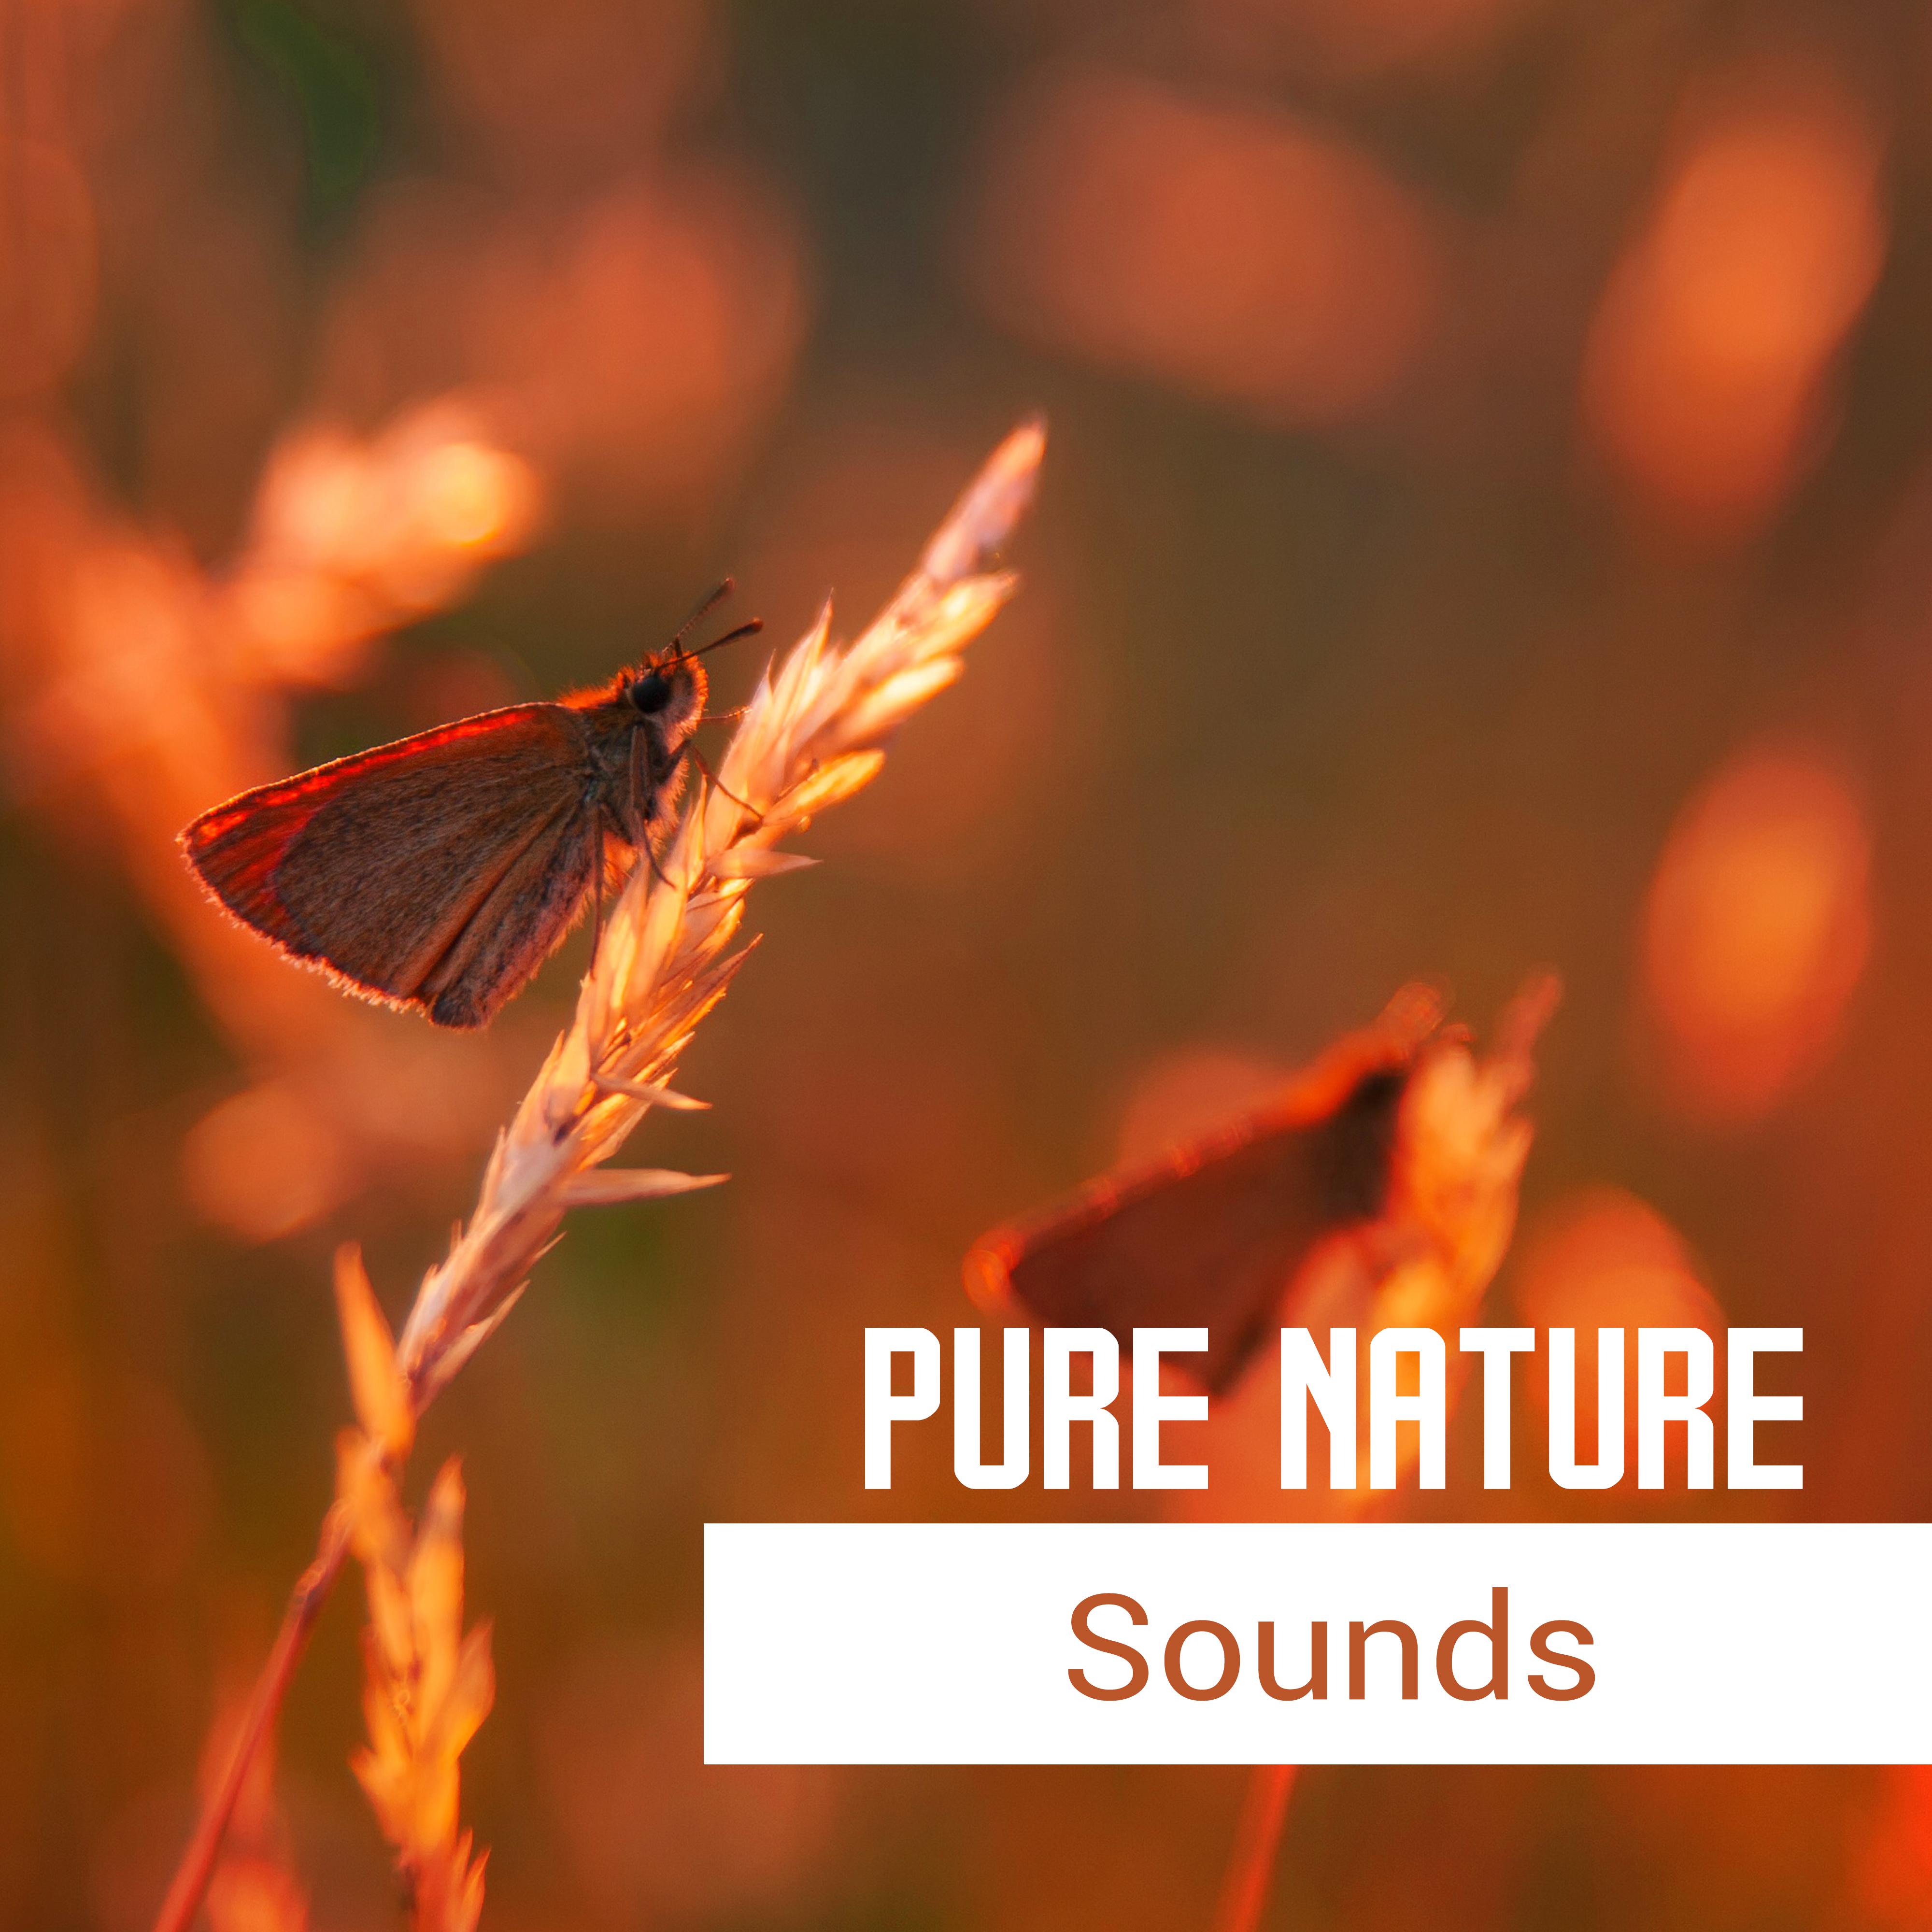 Pure Nature Sounds – Calming Songs for Relax, Stress Relief, Reduce Anxiety, New Age for Healing Nerves